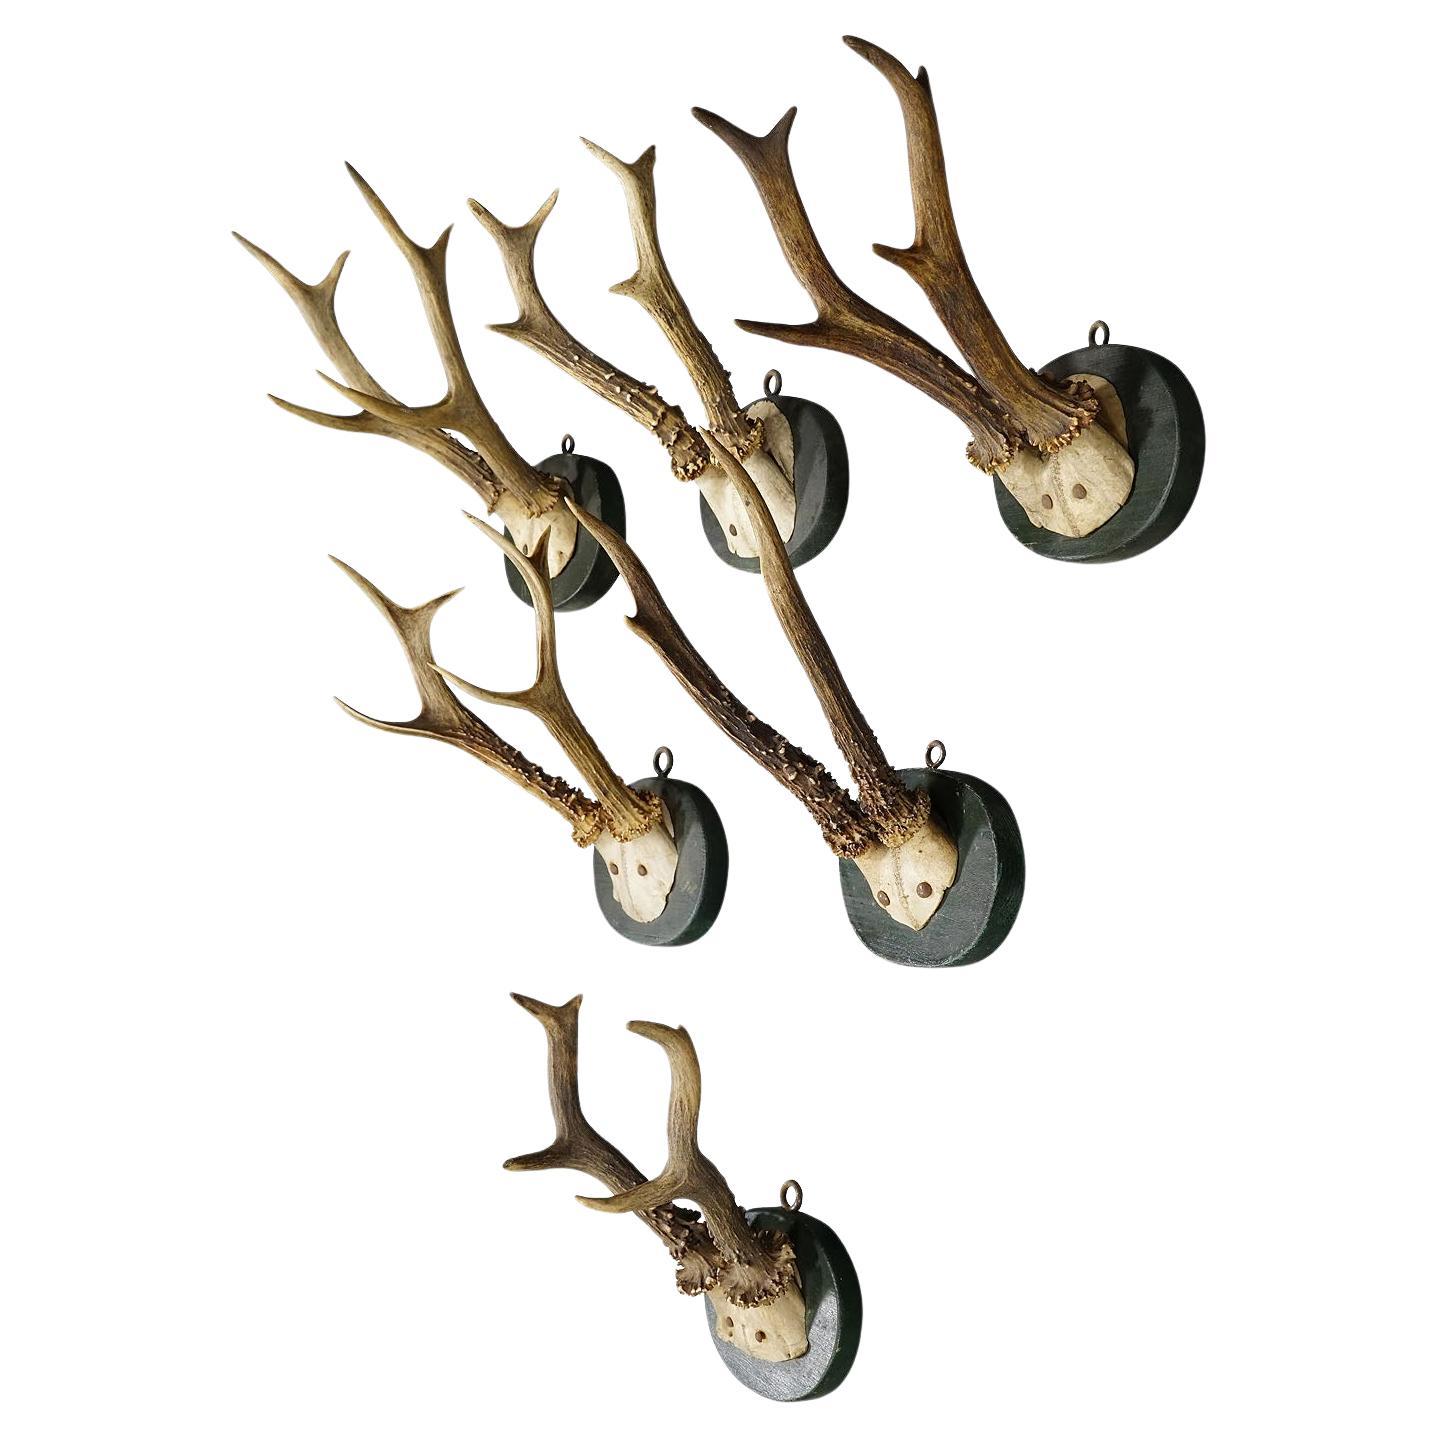 A Set of Six Antique Black Forest Deer Trophies on Wooden Plaques 1880s